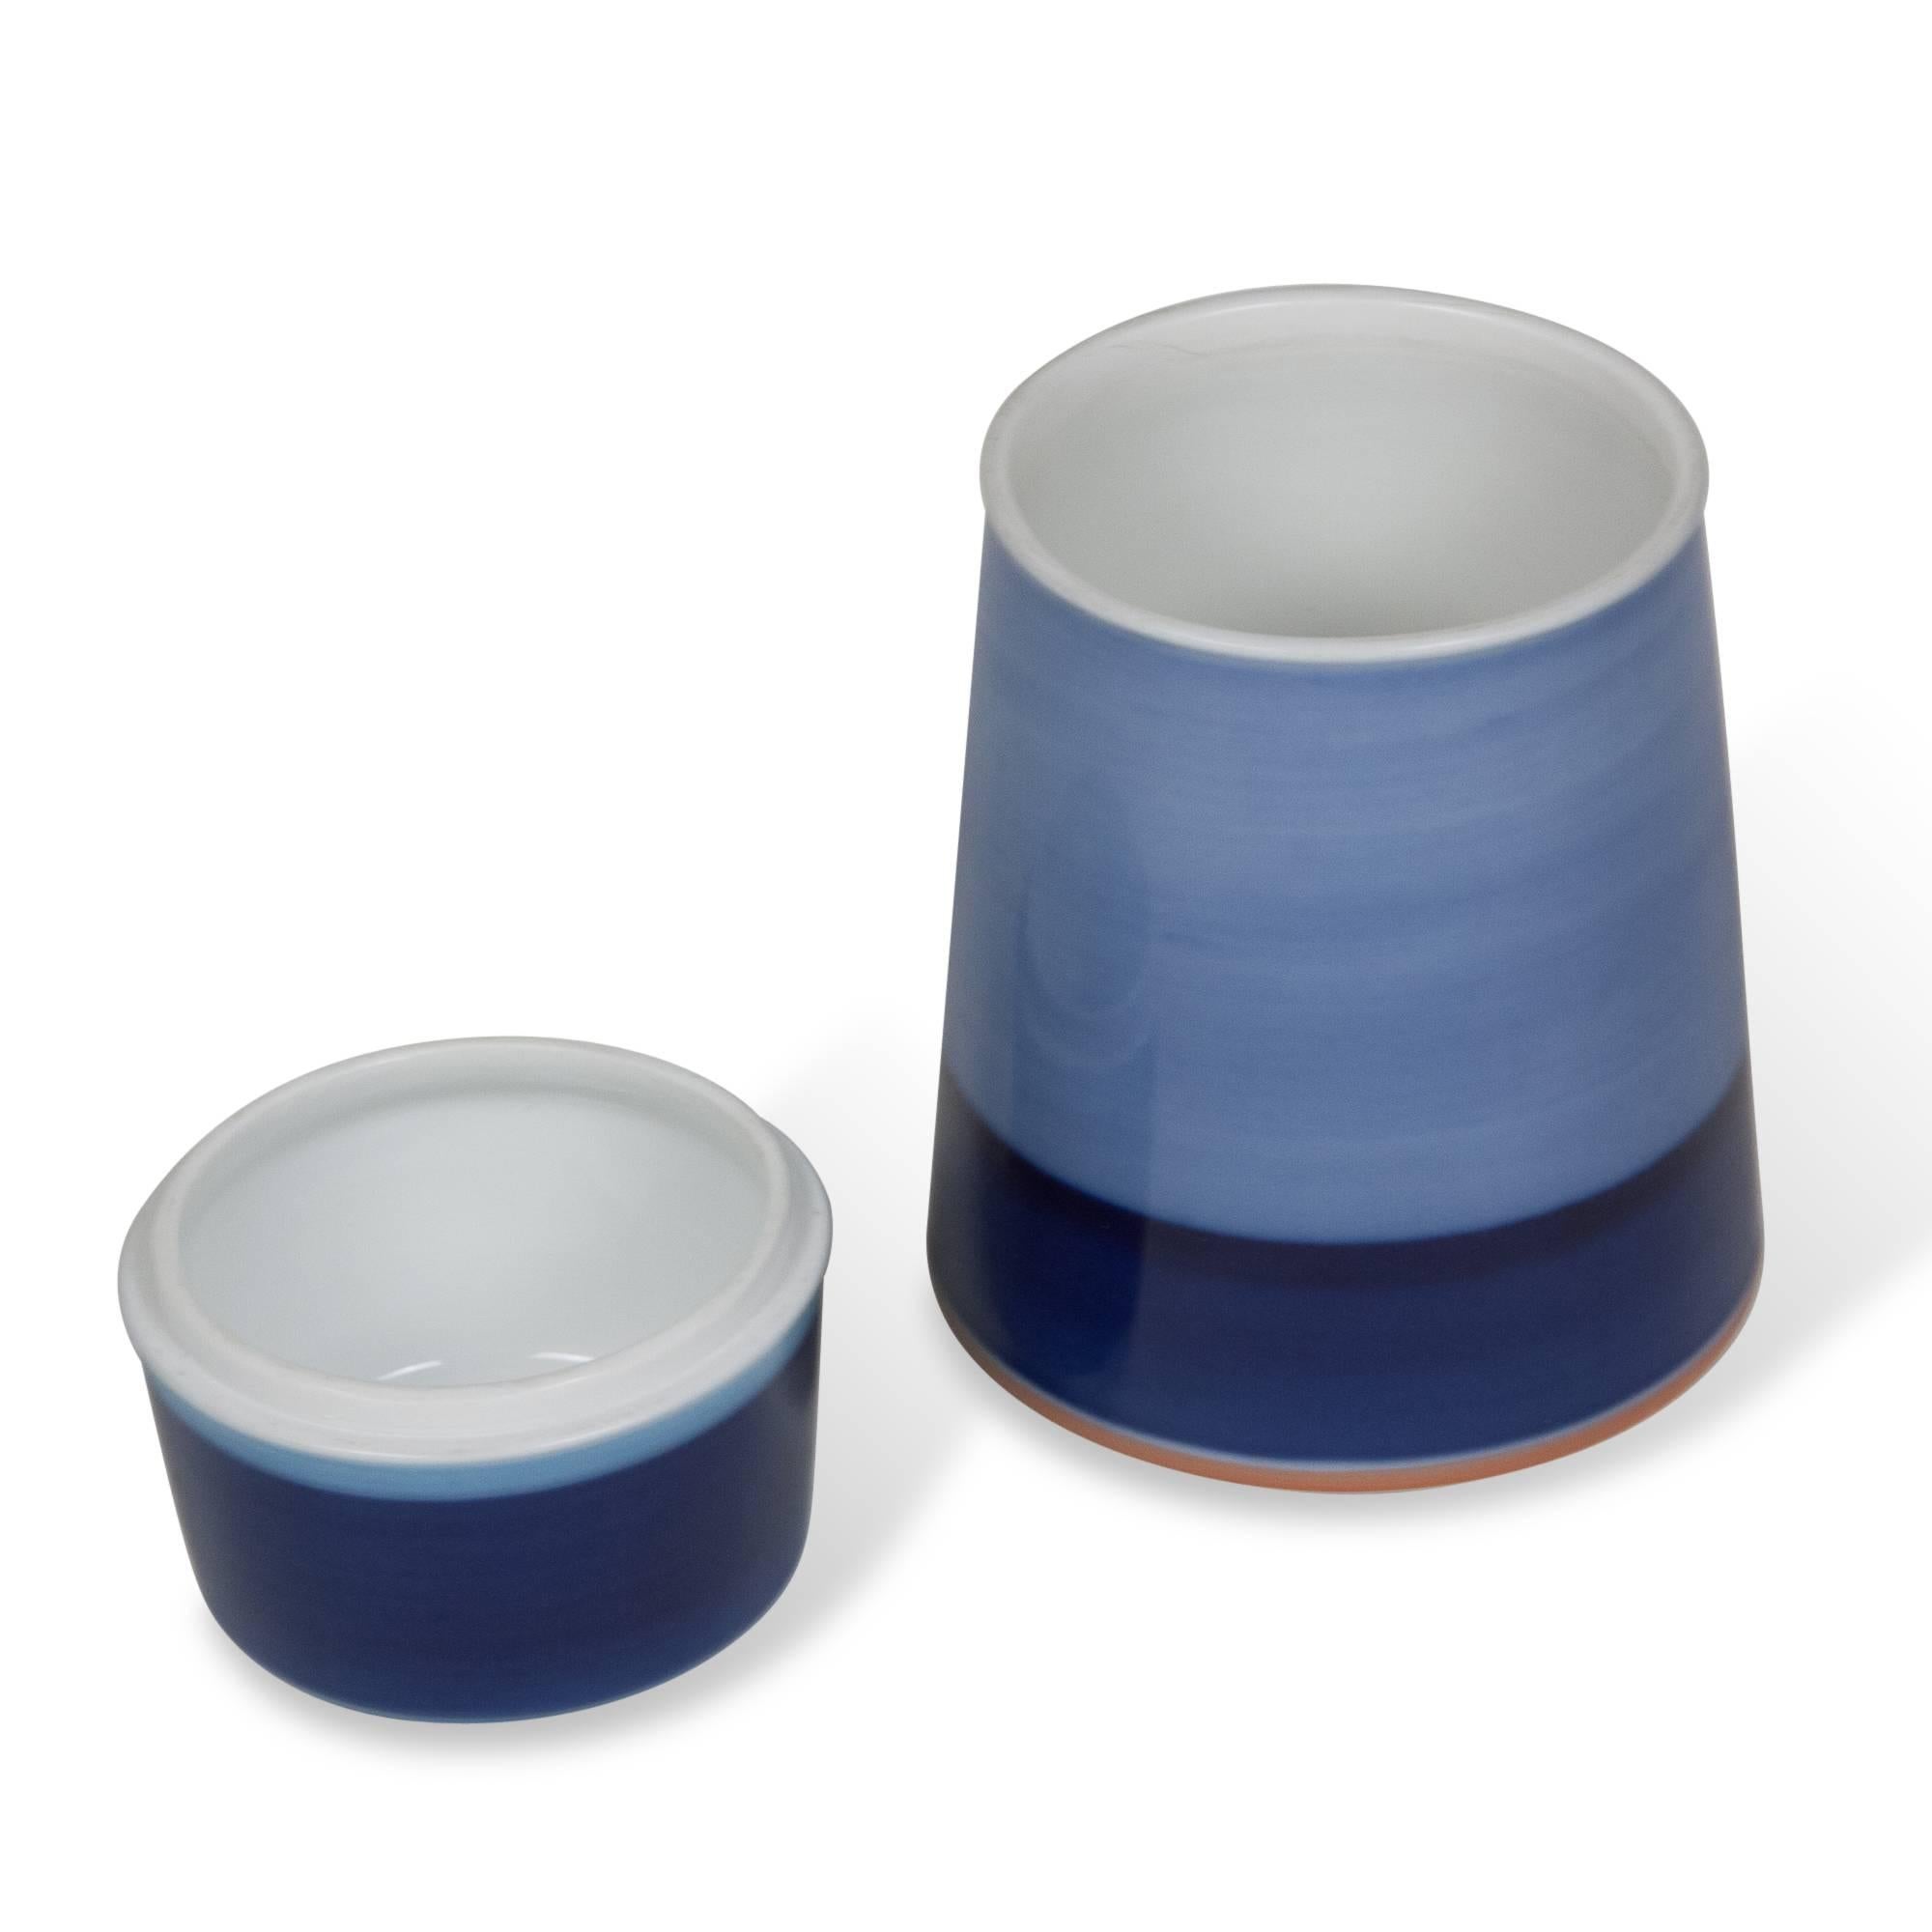 Mid-20th Century Two Cobalt and Blue Porcelain Pieces by KPM, German, 1950s